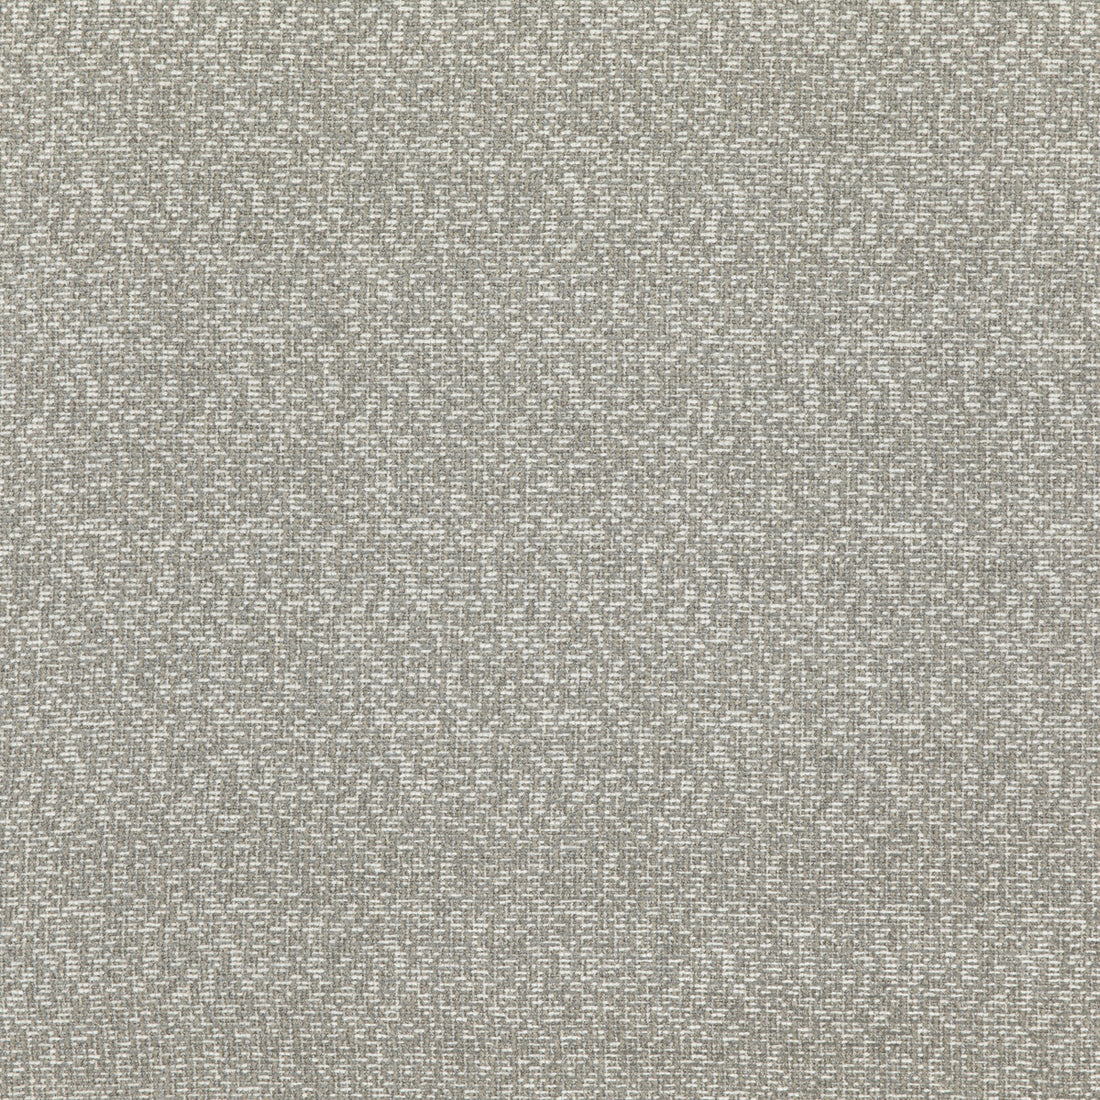 Cala fabric in soft grey color - pattern ED85297.926.0 - by Threads in the Luxury Weaves collection